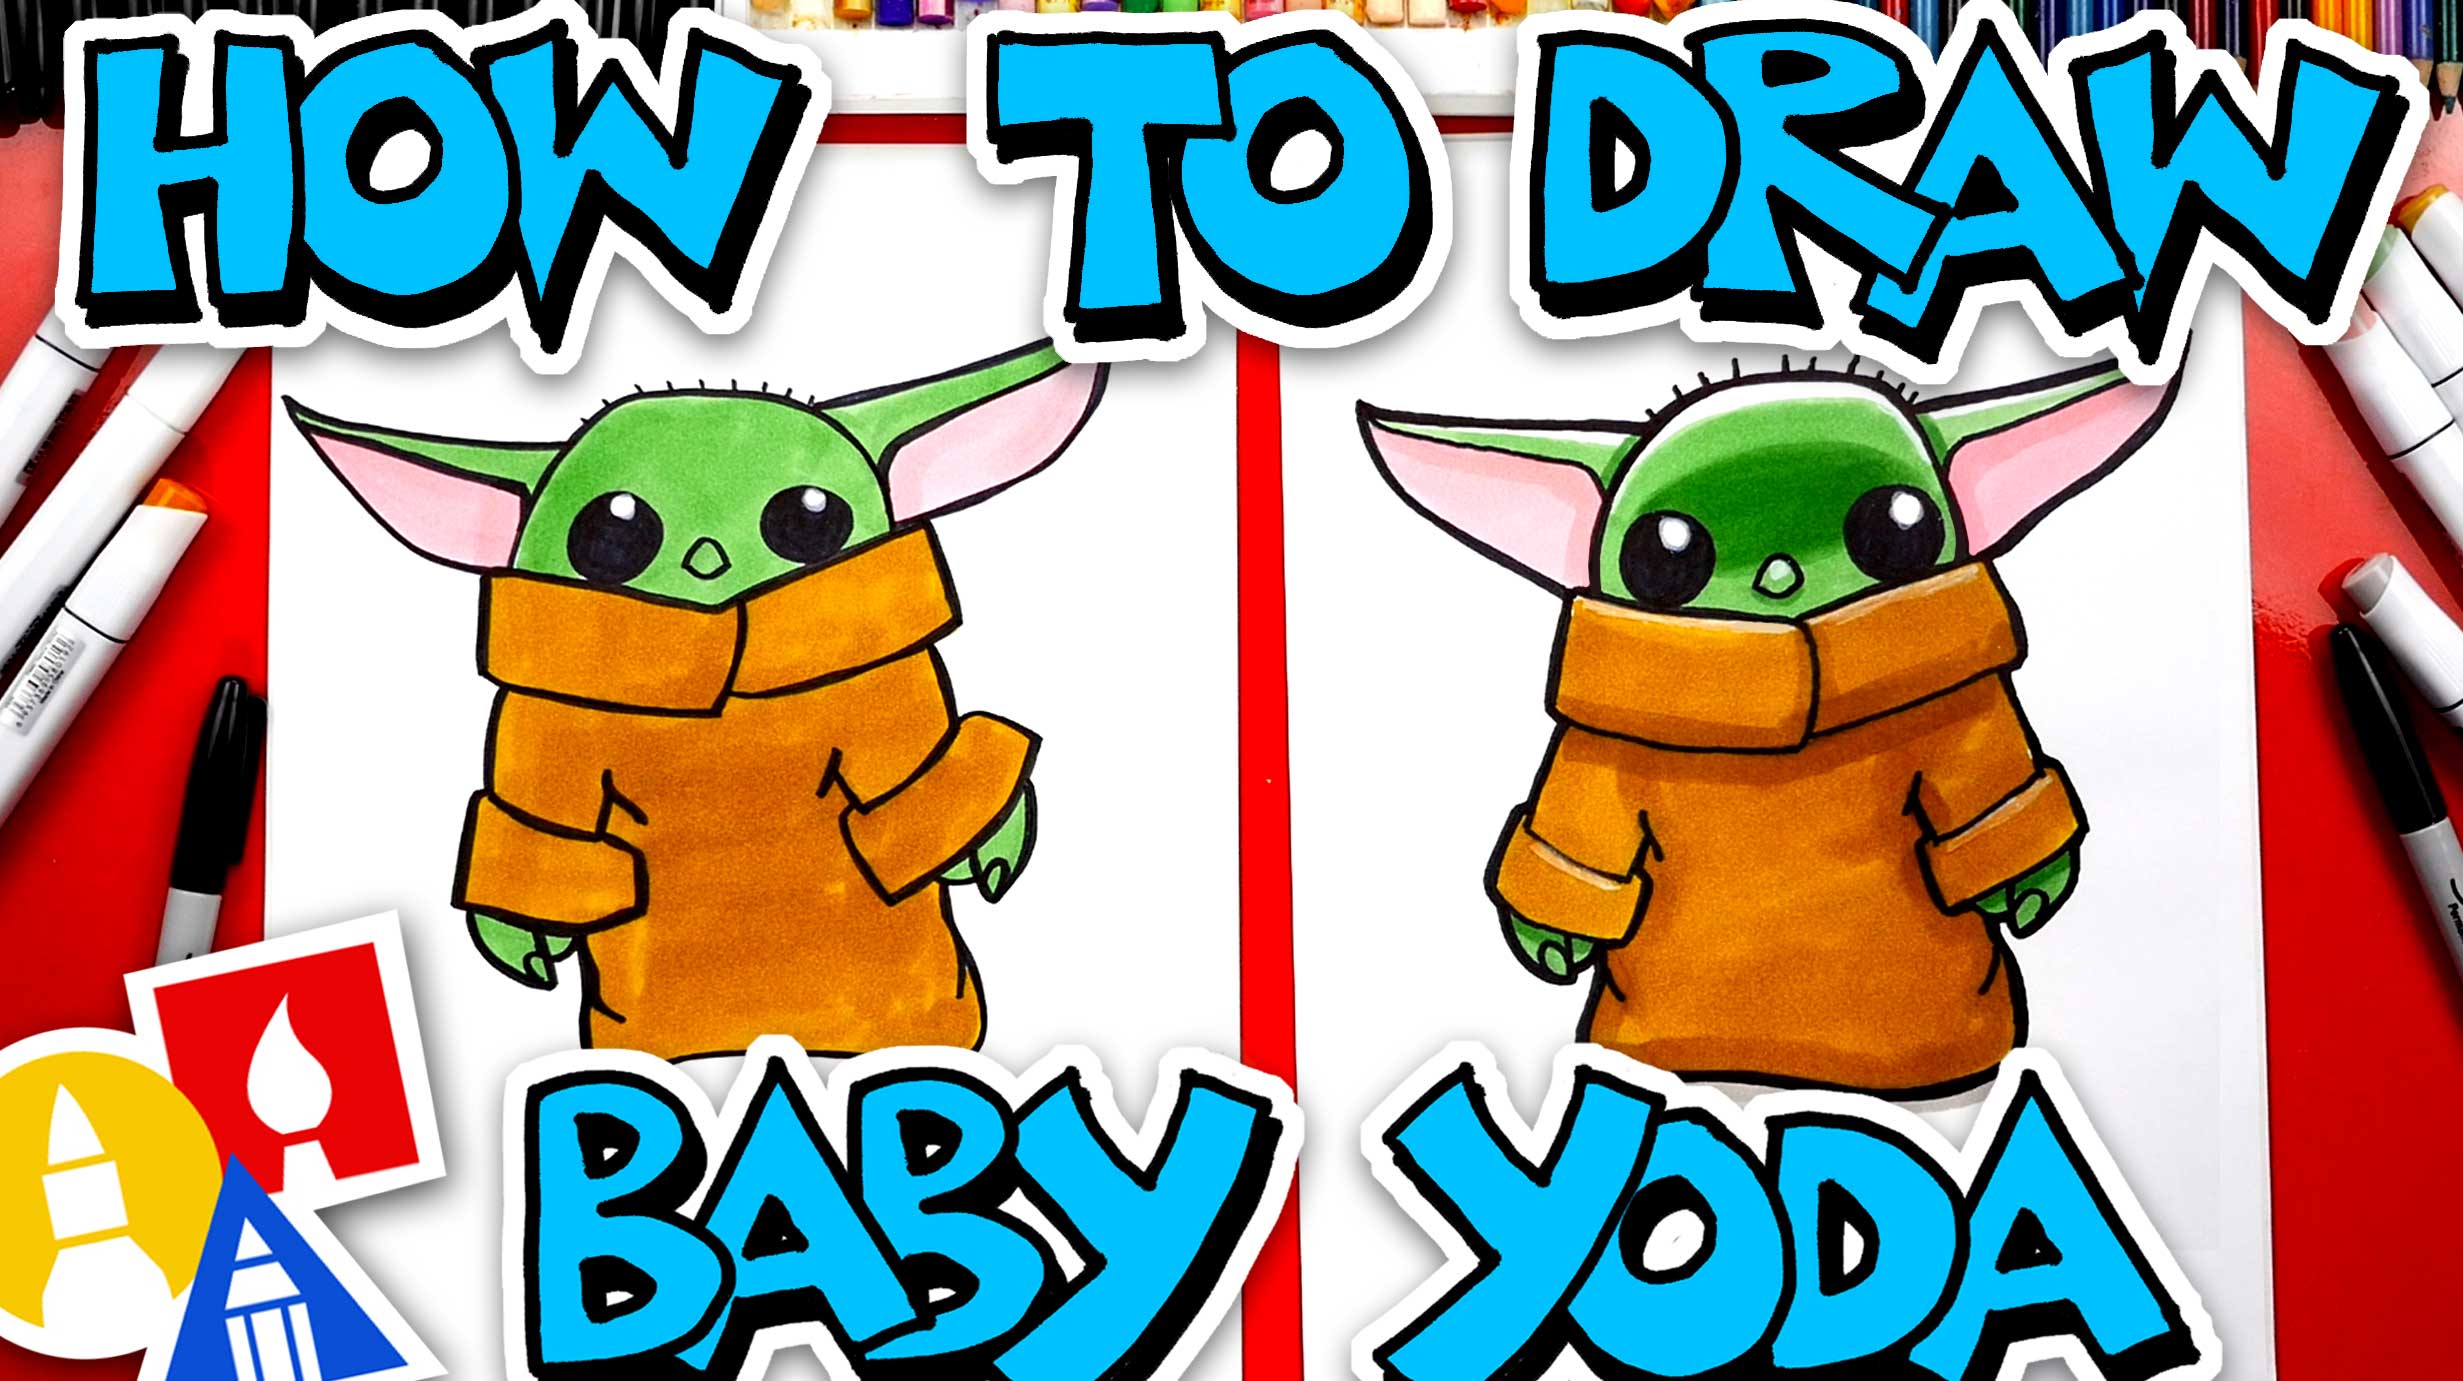 How To Draw Baby Yoda From The Mandalorian - Art For Kids Hub